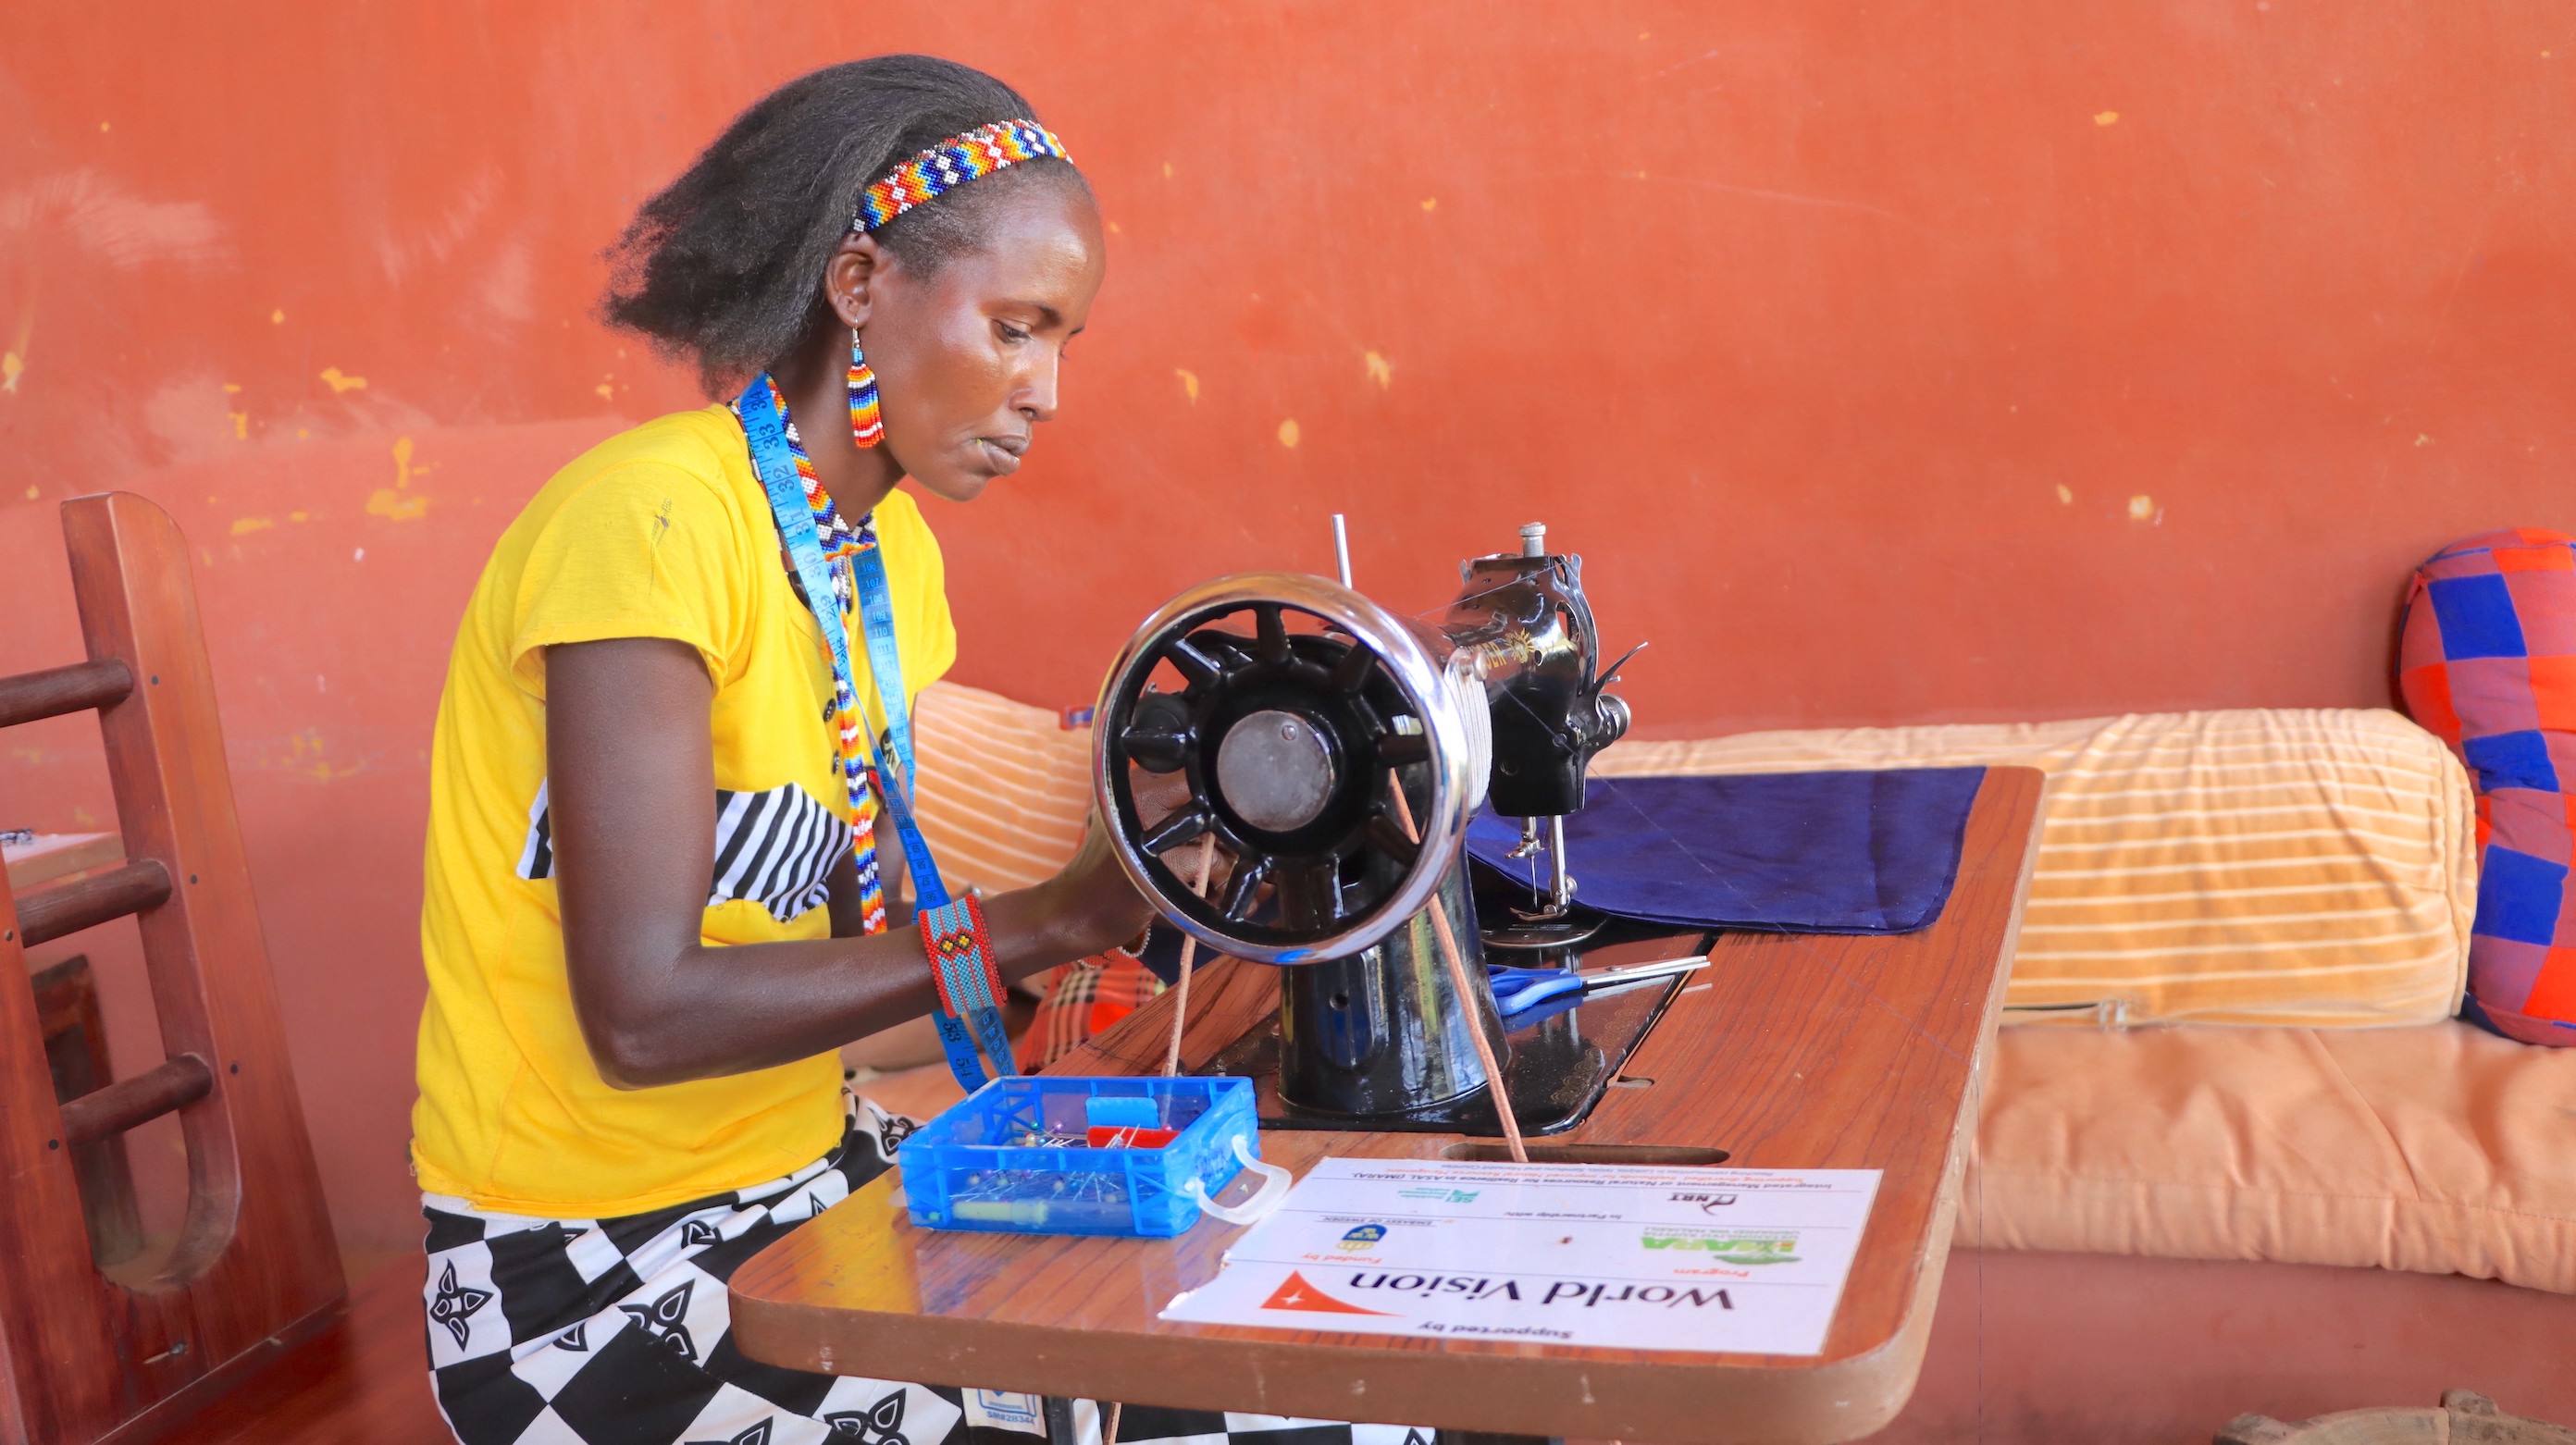 Women trained on tailoring by World Vision now have a sustainable source of income all year round. This allows them to take good care of their children and families, even in times of drought.